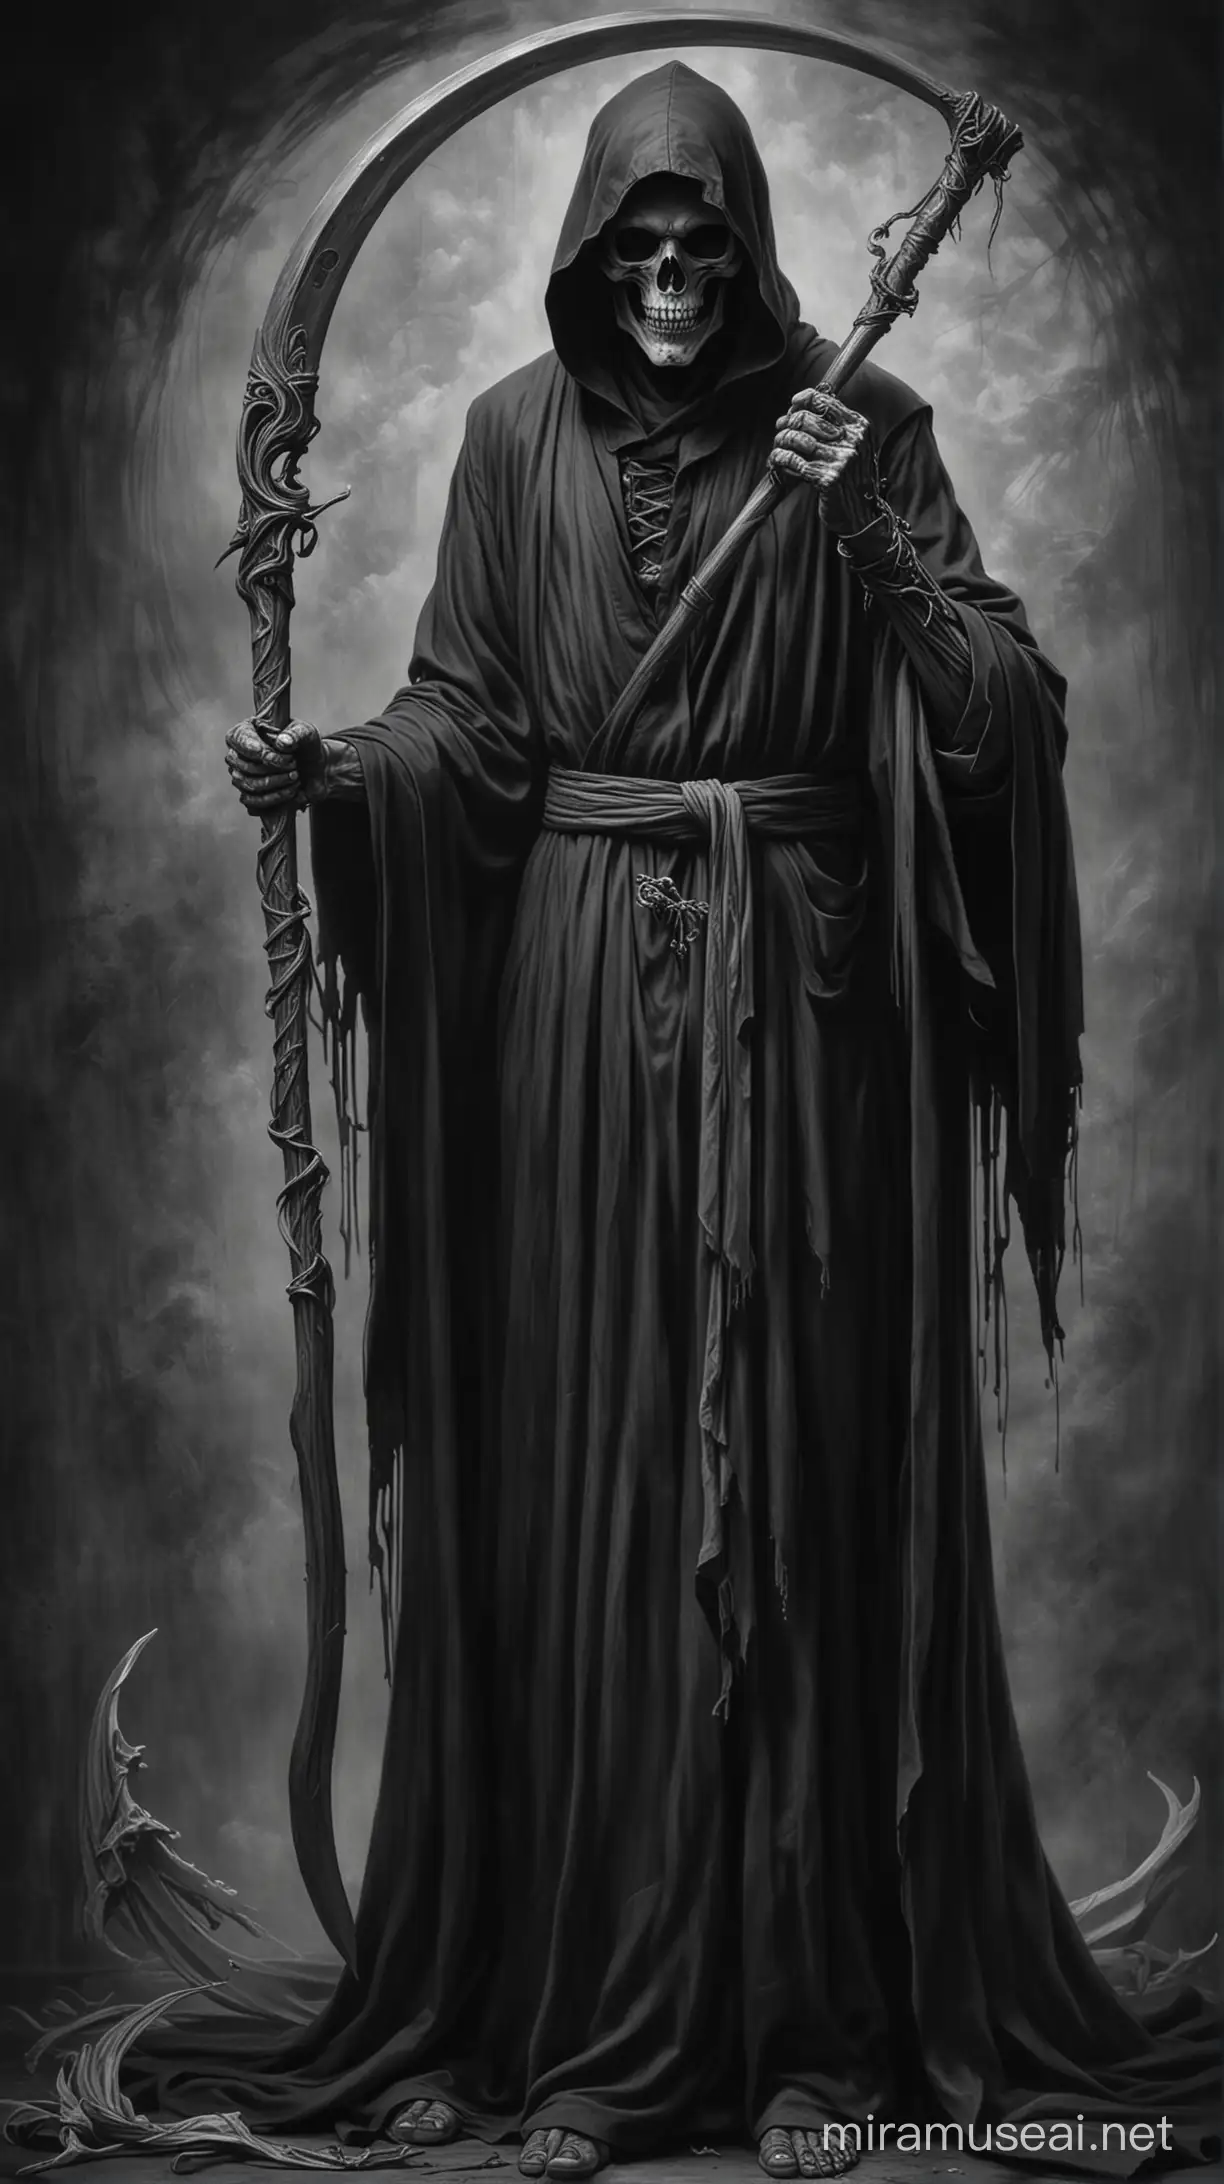 Black and grey realism drawing of Grim reaper holding a scythe in one hand and a scroll in the other hand wearing a full body black robe simplified